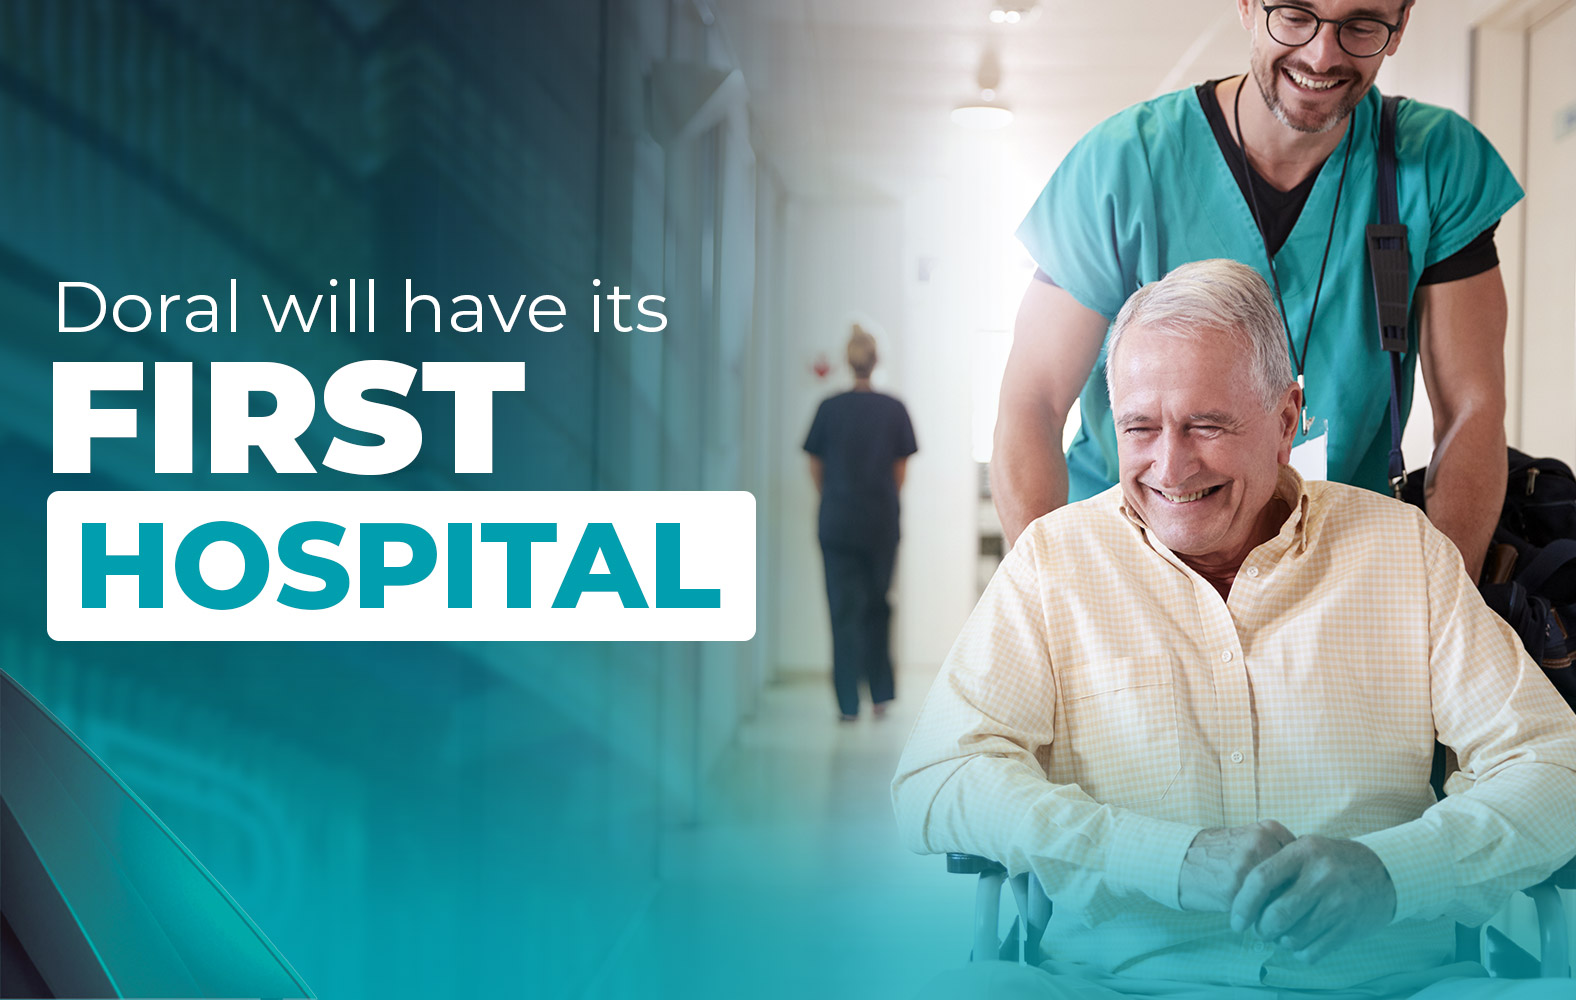 Doral will have its first hospital